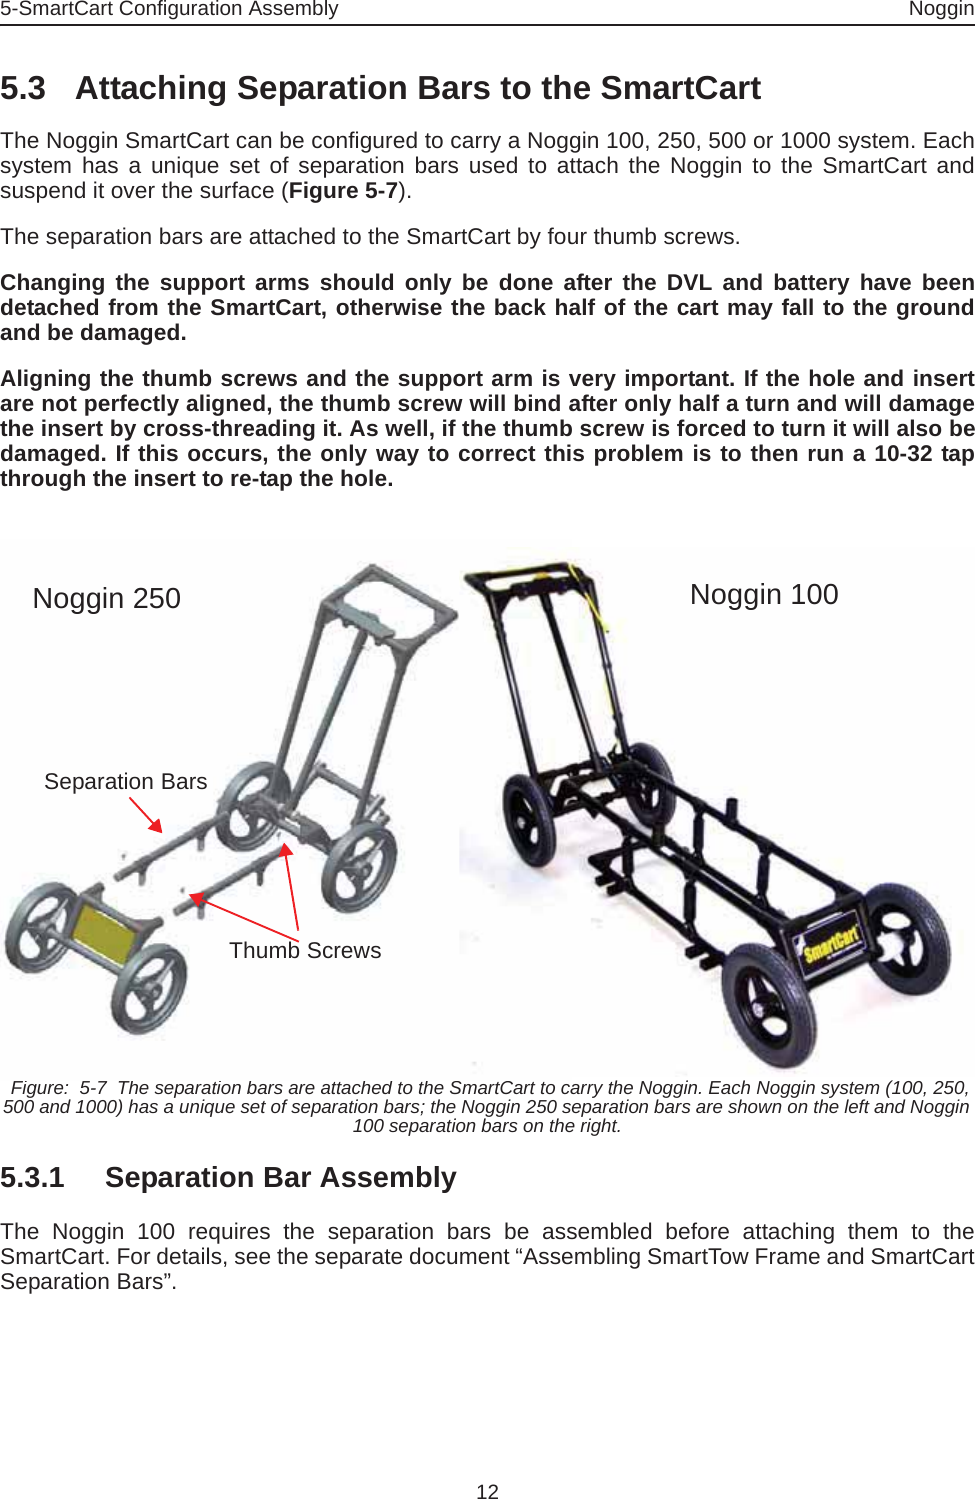 5-SmartCart Configuration Assembly Noggin125.3 Attaching Separation Bars to the SmartCartThe Noggin SmartCart can be configured to carry a Noggin 100, 250, 500 or 1000 system. Eachsystem has a unique set of separation bars used to attach the Noggin to the SmartCart andsuspend it over the surface (Figure 5-7). The separation bars are attached to the SmartCart by four thumb screws. Changing the support arms should only be done after the DVL and battery have beendetached from the SmartCart, otherwise the back half of the cart may fall to the groundand be damaged.Aligning the thumb screws and the support arm is very important. If the hole and insertare not perfectly aligned, the thumb screw will bind after only half a turn and will damagethe insert by cross-threading it. As well, if the thumb screw is forced to turn it will also bedamaged. If this occurs, the only way to correct this problem is to then run a 10-32 tapthrough the insert to re-tap the hole.  Figure:  5-7  The separation bars are attached to the SmartCart to carry the Noggin. Each Noggin system (100, 250, 500 and 1000) has a unique set of separation bars; the Noggin 250 separation bars are shown on the left and Noggin 100 separation bars on the right.5.3.1 Separation Bar AssemblyThe Noggin 100 requires the separation bars be assembled before attaching them to theSmartCart. For details, see the separate document “Assembling SmartTow Frame and SmartCartSeparation Bars”.Noggin 100Noggin 250Separation BarsThumb Screws